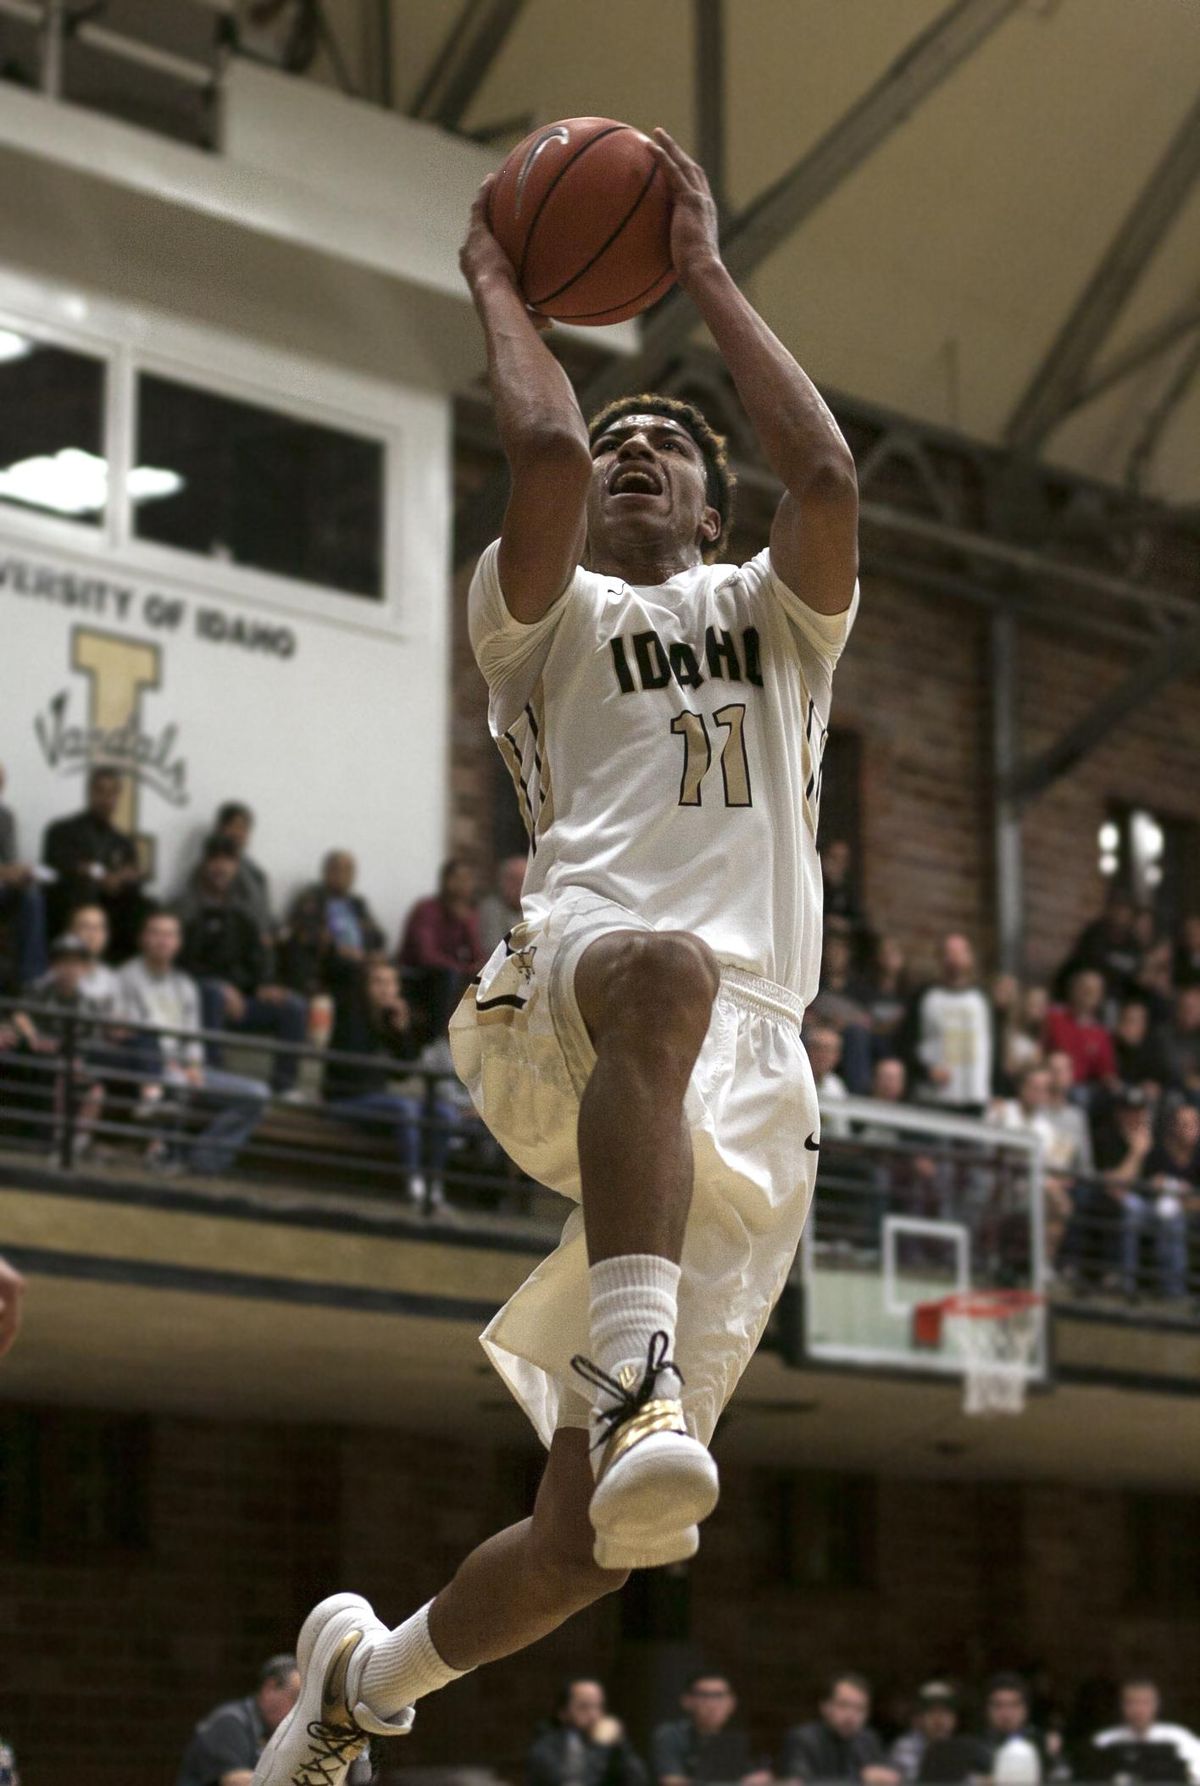 Idaho guard Victor Sanders drives to the rim after a steal in the first period against Corban University in the Memorial Gym in Moscow on Feb. 22, 2017. (Tess Fox)